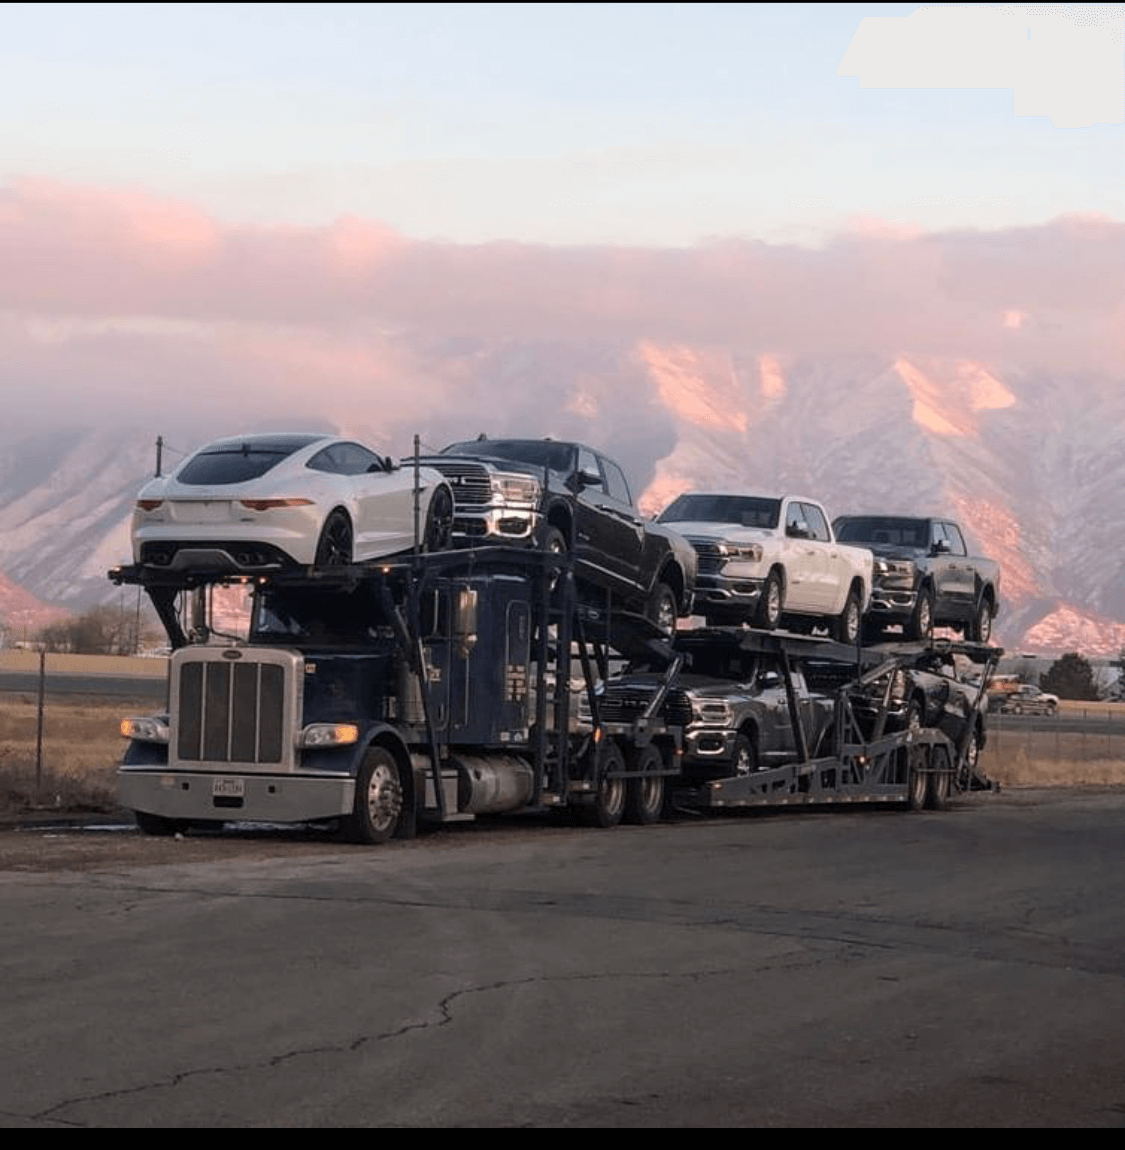 A large truck transporting multiple vehicles photographed along a scenic route.